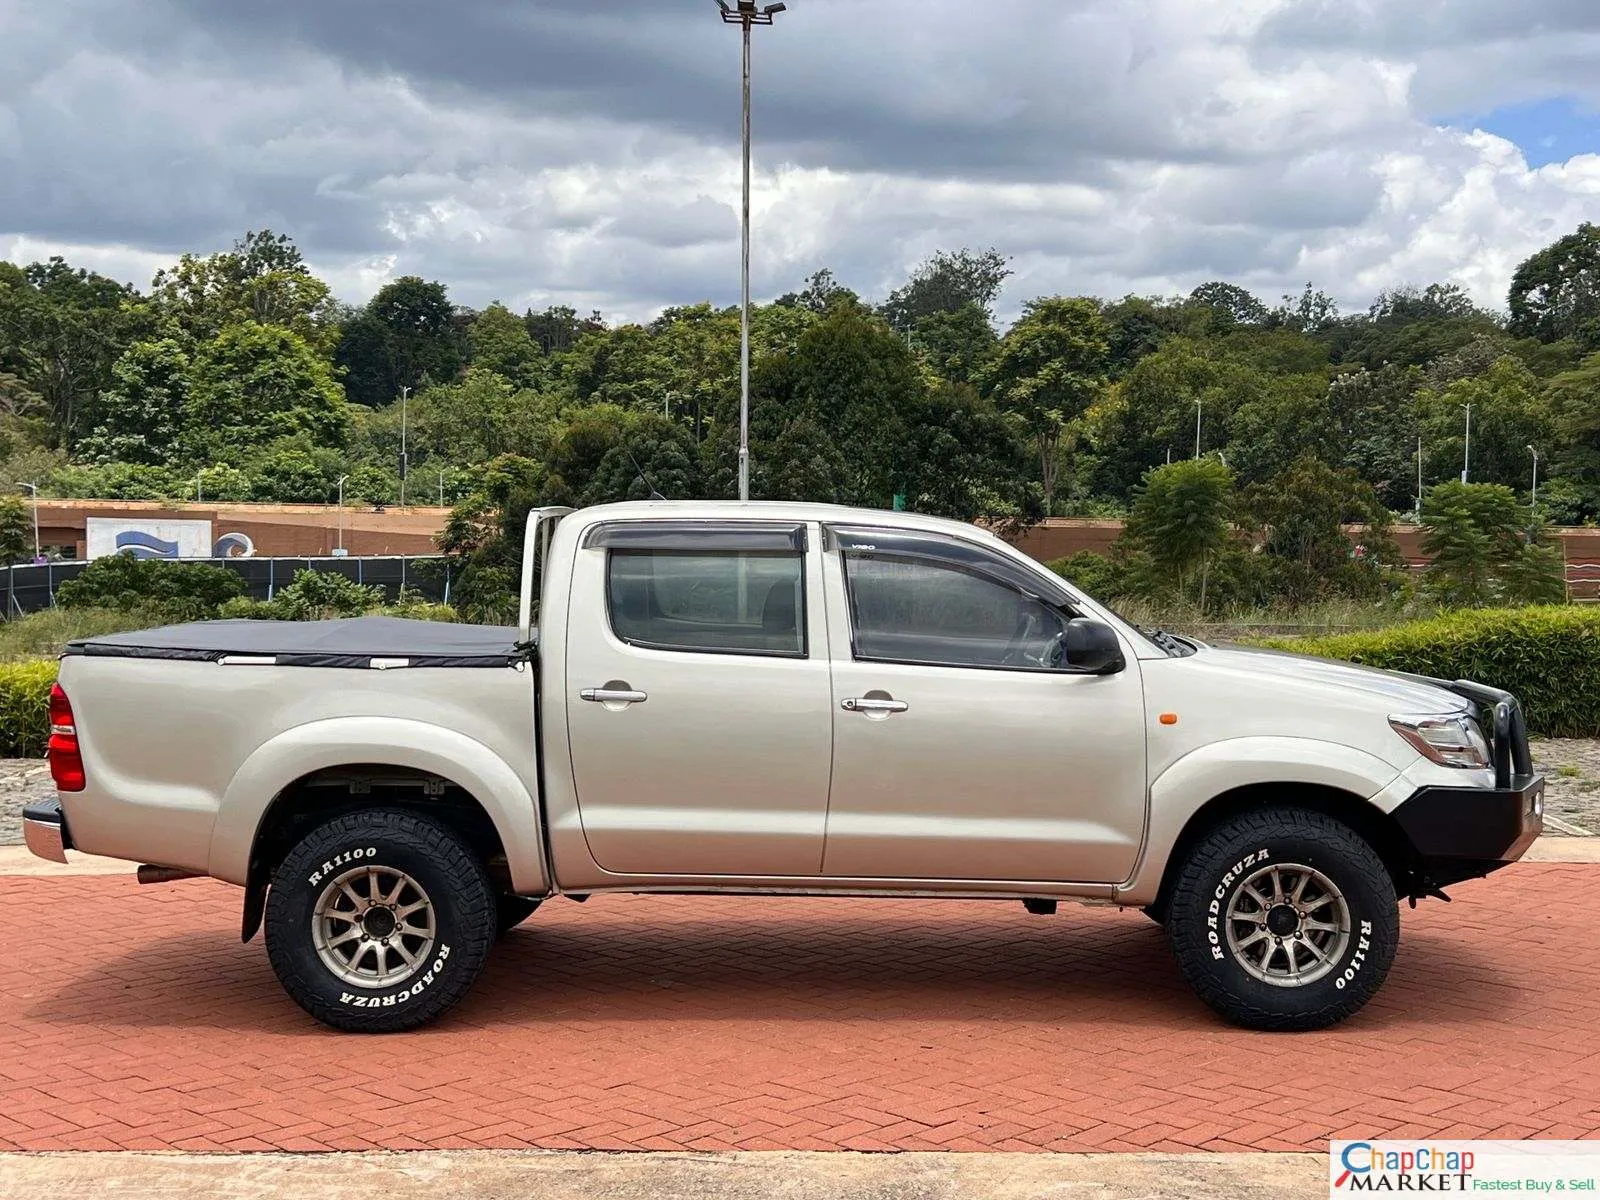 Toyota Hilux locally Double cab You Pay 30% Deposit trade in OK hire purchase installments Kenya cabin